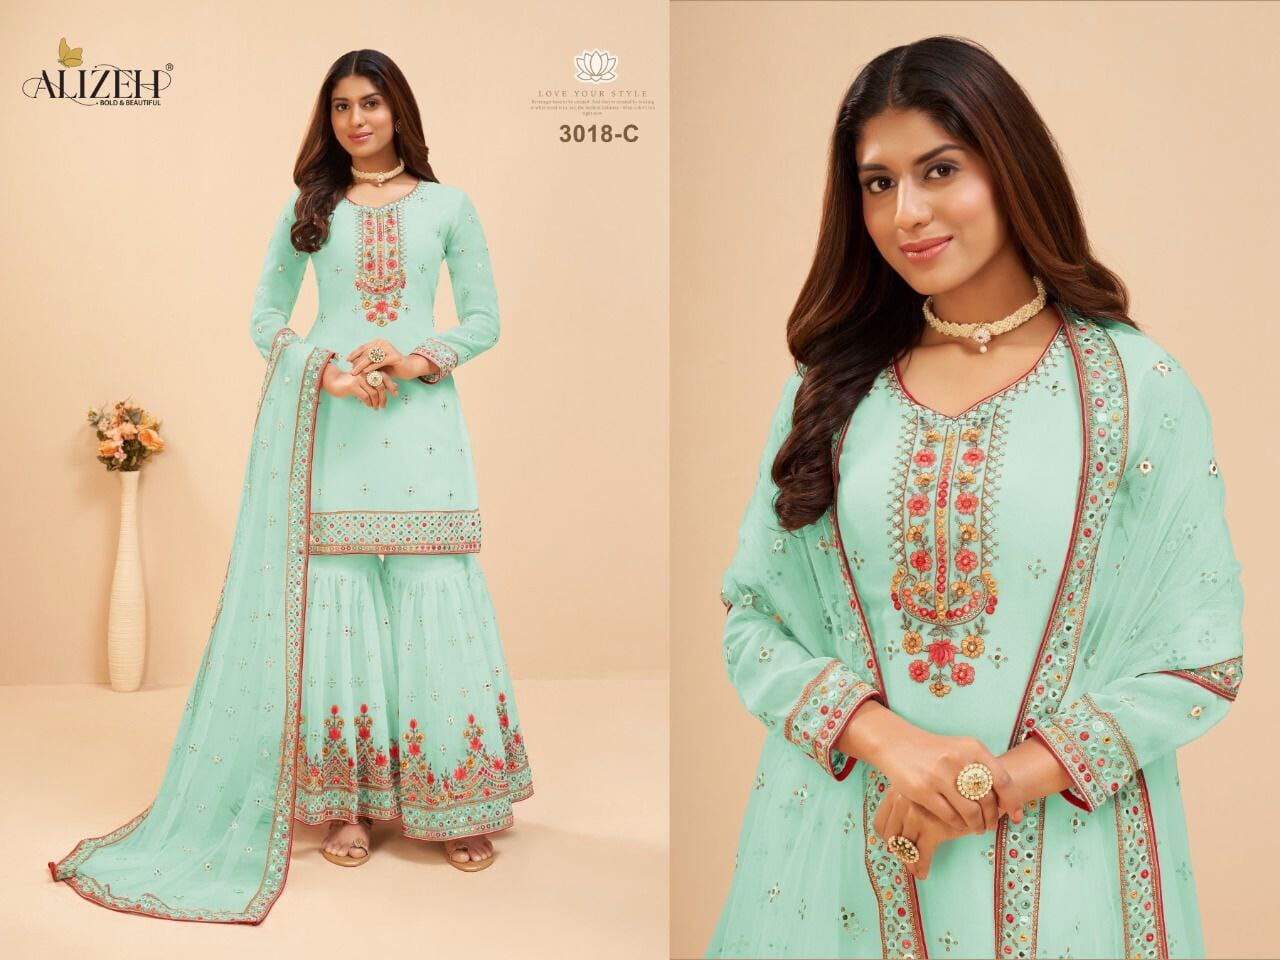 3018 C Heavy Georgette Embroidered Plazzo Suit designer Suits Alizeh 